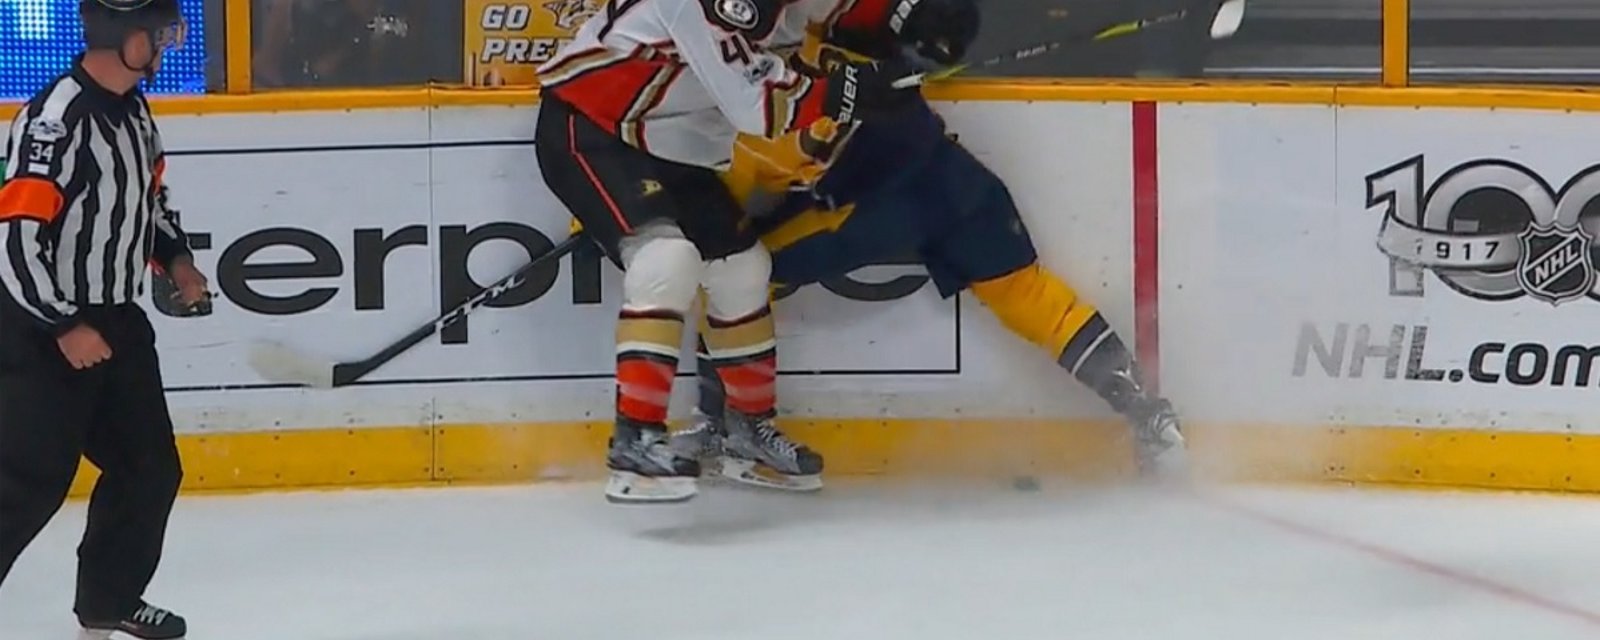 Breaking: Predators forward leaves the game after his head is pancaked into the boards.